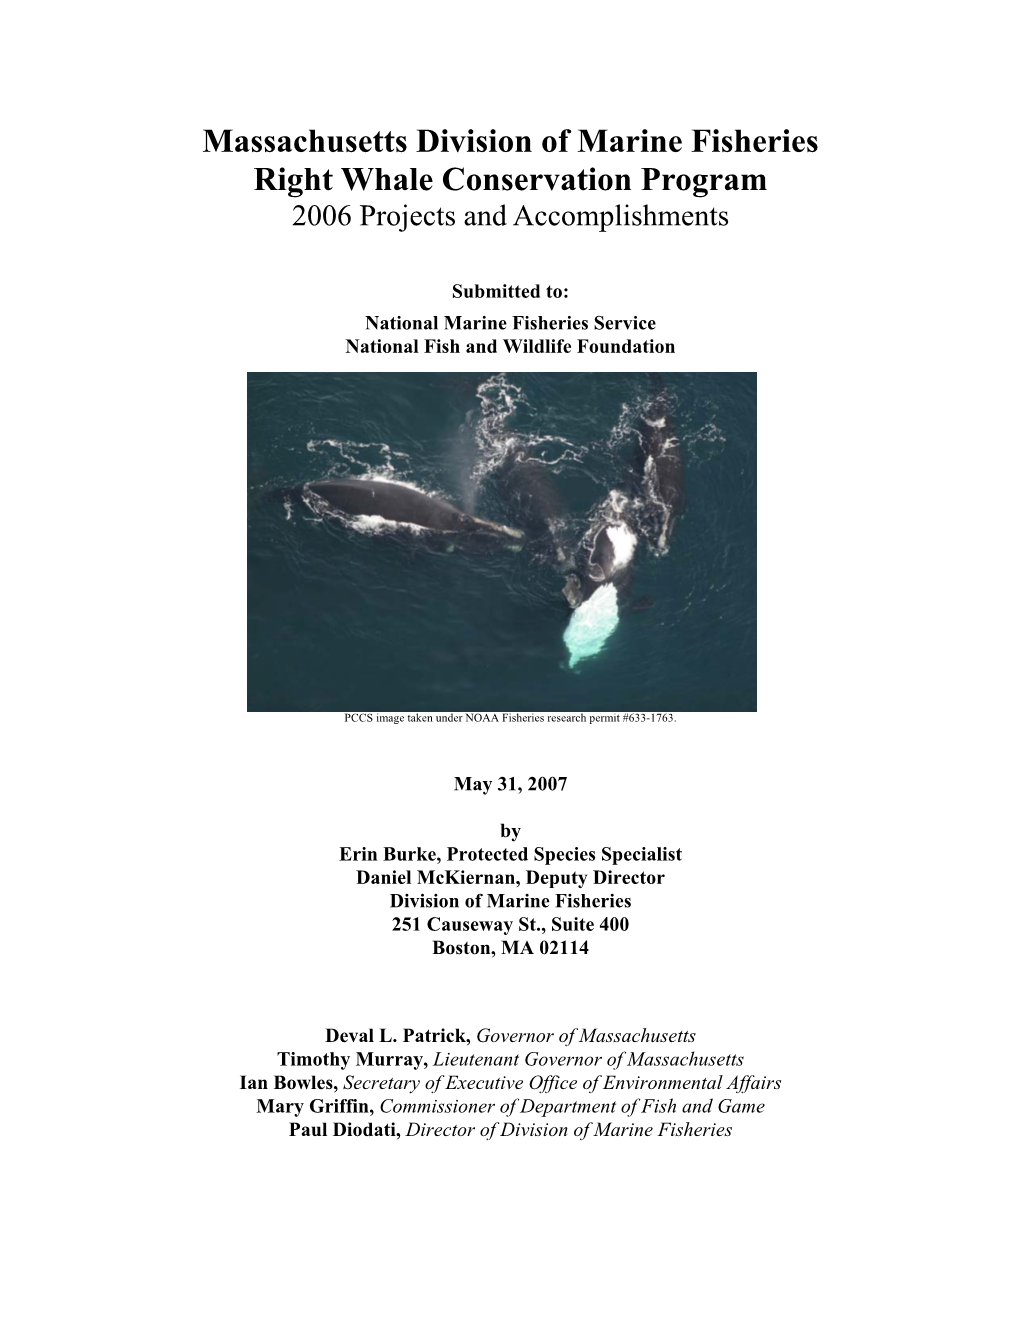 Massachusetts Division of Marine Fisheries Right Whale Conservation Program 2006 Projects and Accomplishments